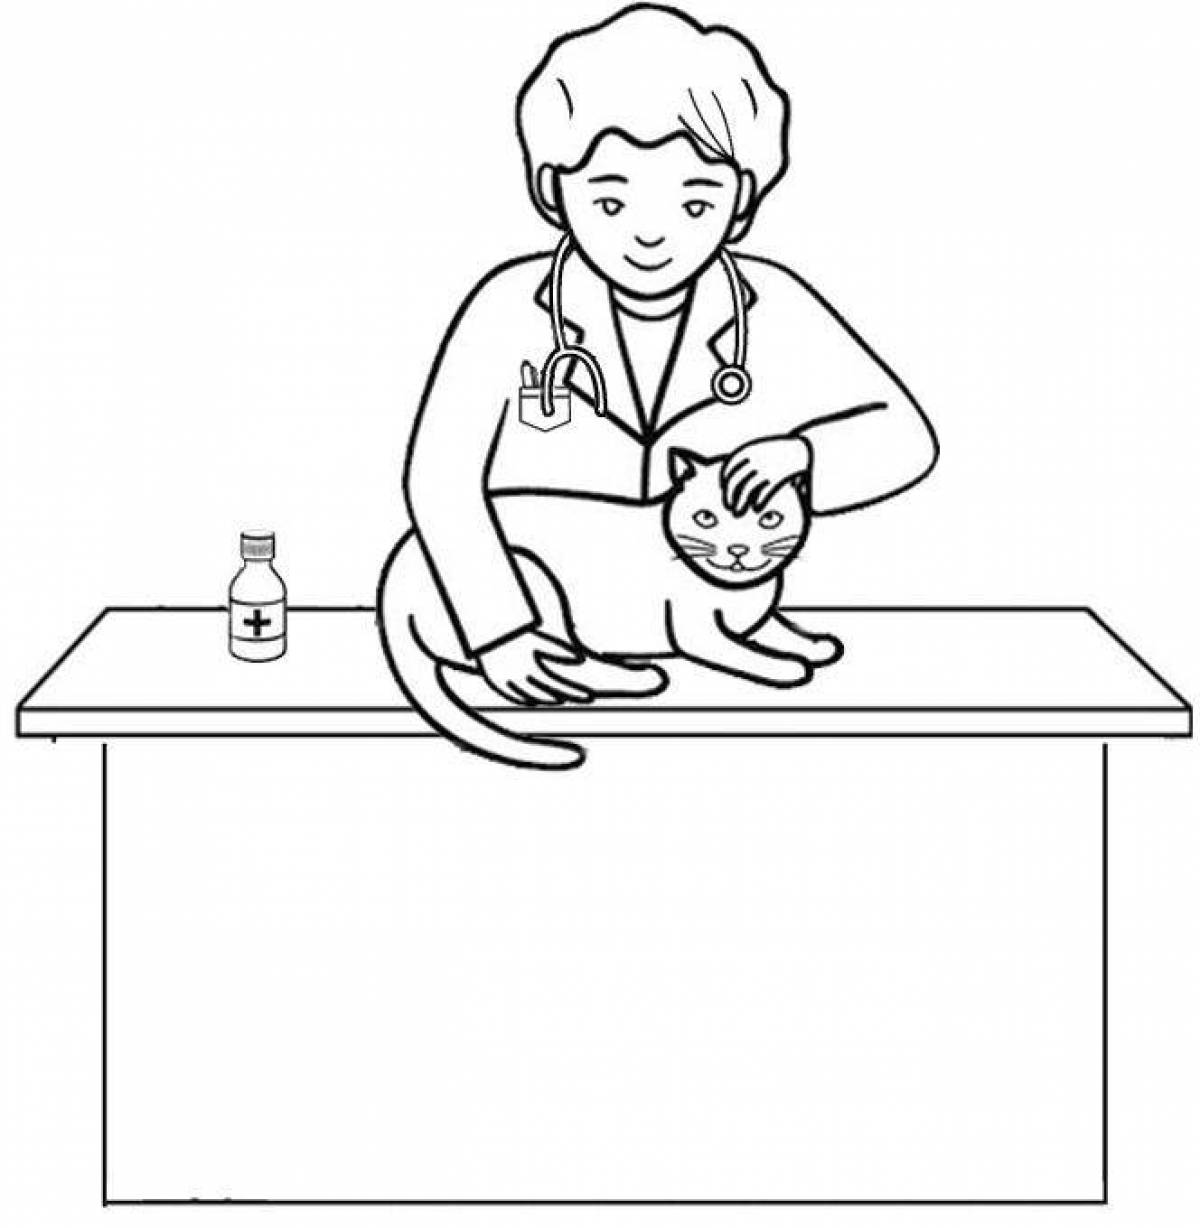 Playful veterinarian coloring page